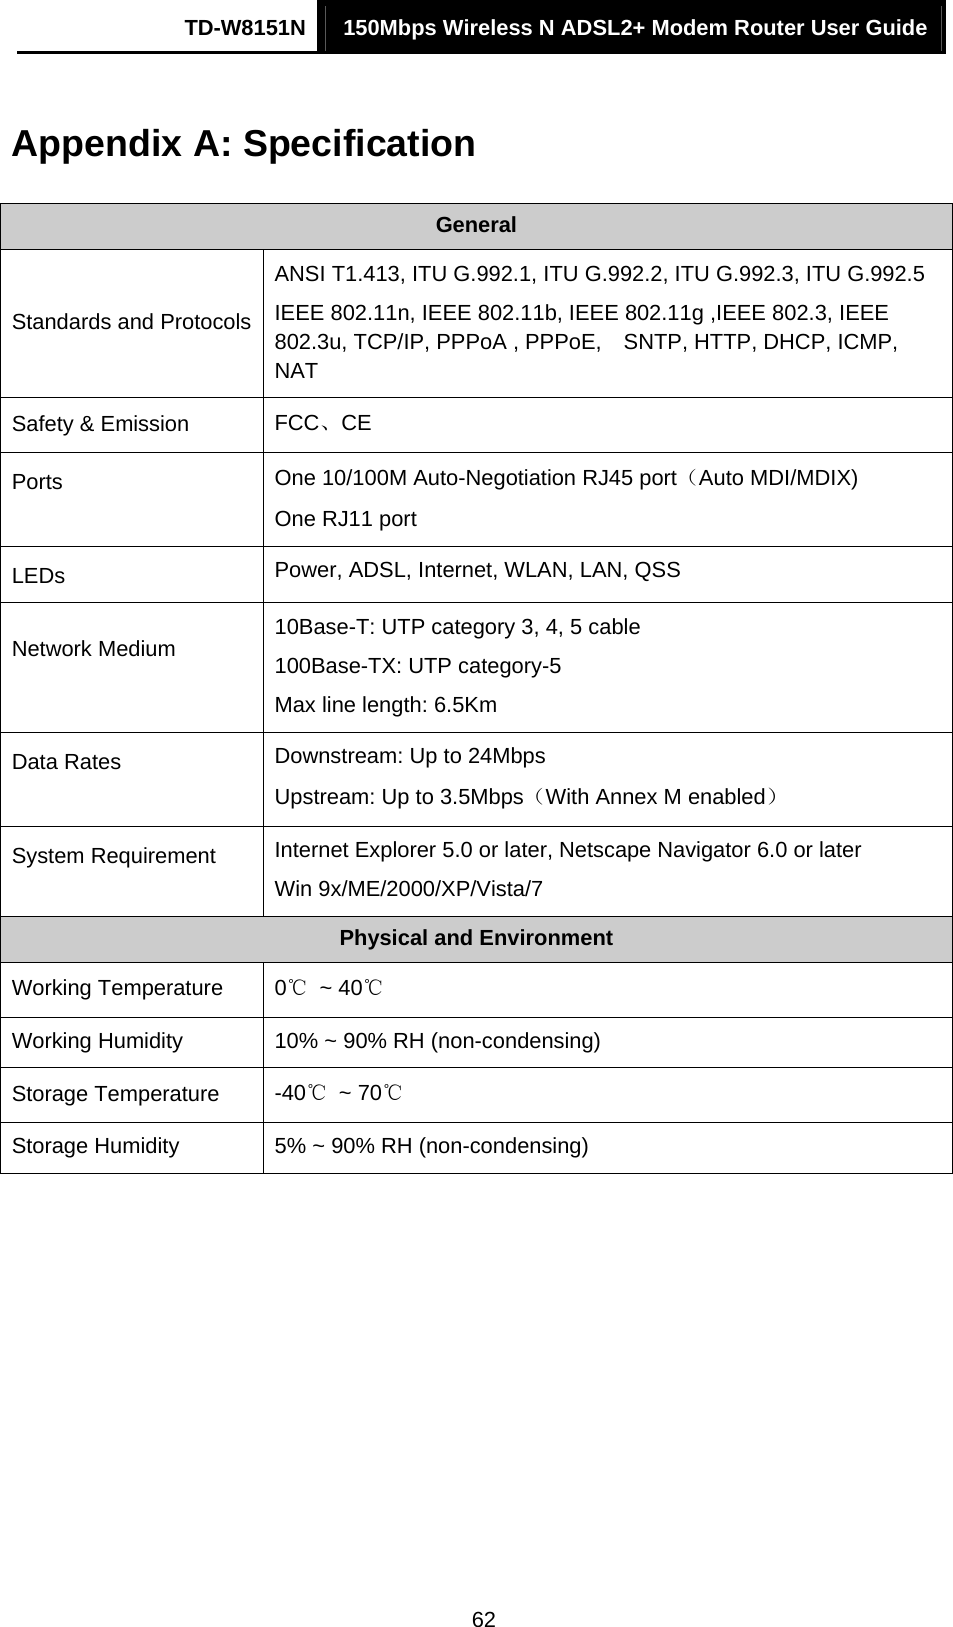 TD-W8151N  150Mbps Wireless N ADSL2+ Modem Router User Guide  62Appendix A: Specification General Standards and Protocols ANSI T1.413, ITU G.992.1, ITU G.992.2, ITU G.992.3, ITU G.992.5 IEEE 802.11n, IEEE 802.11b, IEEE 802.11g ,IEEE 802.3, IEEE 802.3u, TCP/IP, PPPoA , PPPoE,    SNTP, HTTP, DHCP, ICMP, NAT Safety &amp; Emission  FCC、CE Ports  One 10/100M Auto-Negotiation RJ45 port（Auto MDI/MDIX) One RJ11 port LEDs  Power, ADSL, Internet, WLAN, LAN, QSS Network Medium  10Base-T: UTP category 3, 4, 5 cable 100Base-TX: UTP category-5 Max line length: 6.5Km Data Rates  Downstream: Up to 24Mbps Upstream: Up to 3.5Mbps（With Annex M enabled） System Requirement  Internet Explorer 5.0 or later, Netscape Navigator 6.0 or later Win 9x/ME/2000/XP/Vista/7 Physical and Environment Working Temperature  0℃ ~ 40℃ Working Humidity  10% ~ 90% RH (non-condensing) Storage Temperature  -40℃ ~ 70℃ Storage Humidity  5% ~ 90% RH (non-condensing)  